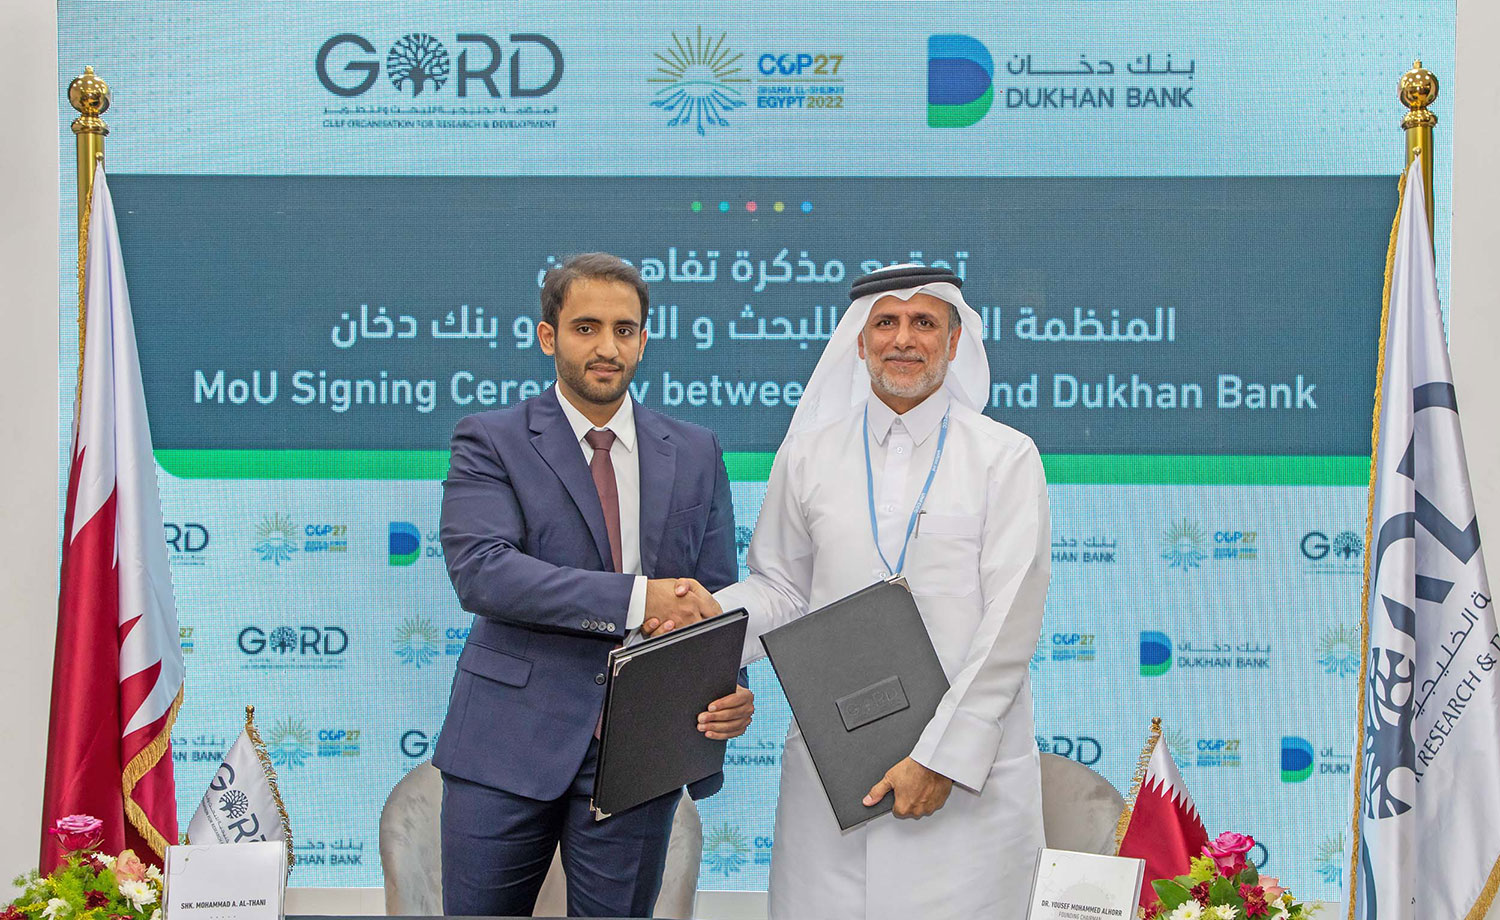 GORD and Dukhan Bank signing MoU